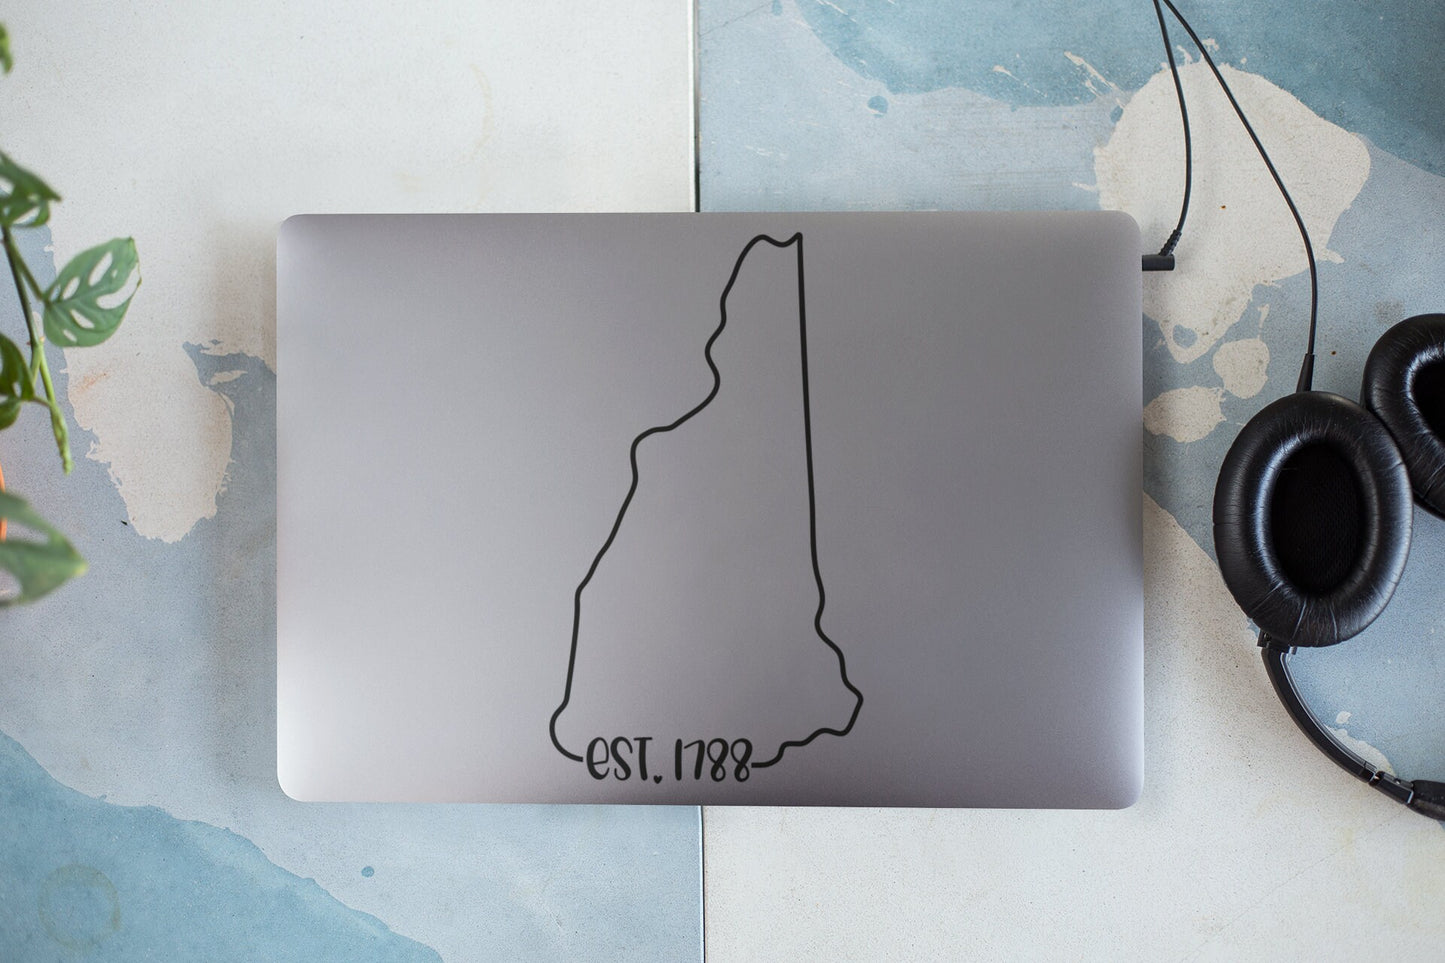 New Hampshire EST. 1788 Decal - Many Colors & Sizes